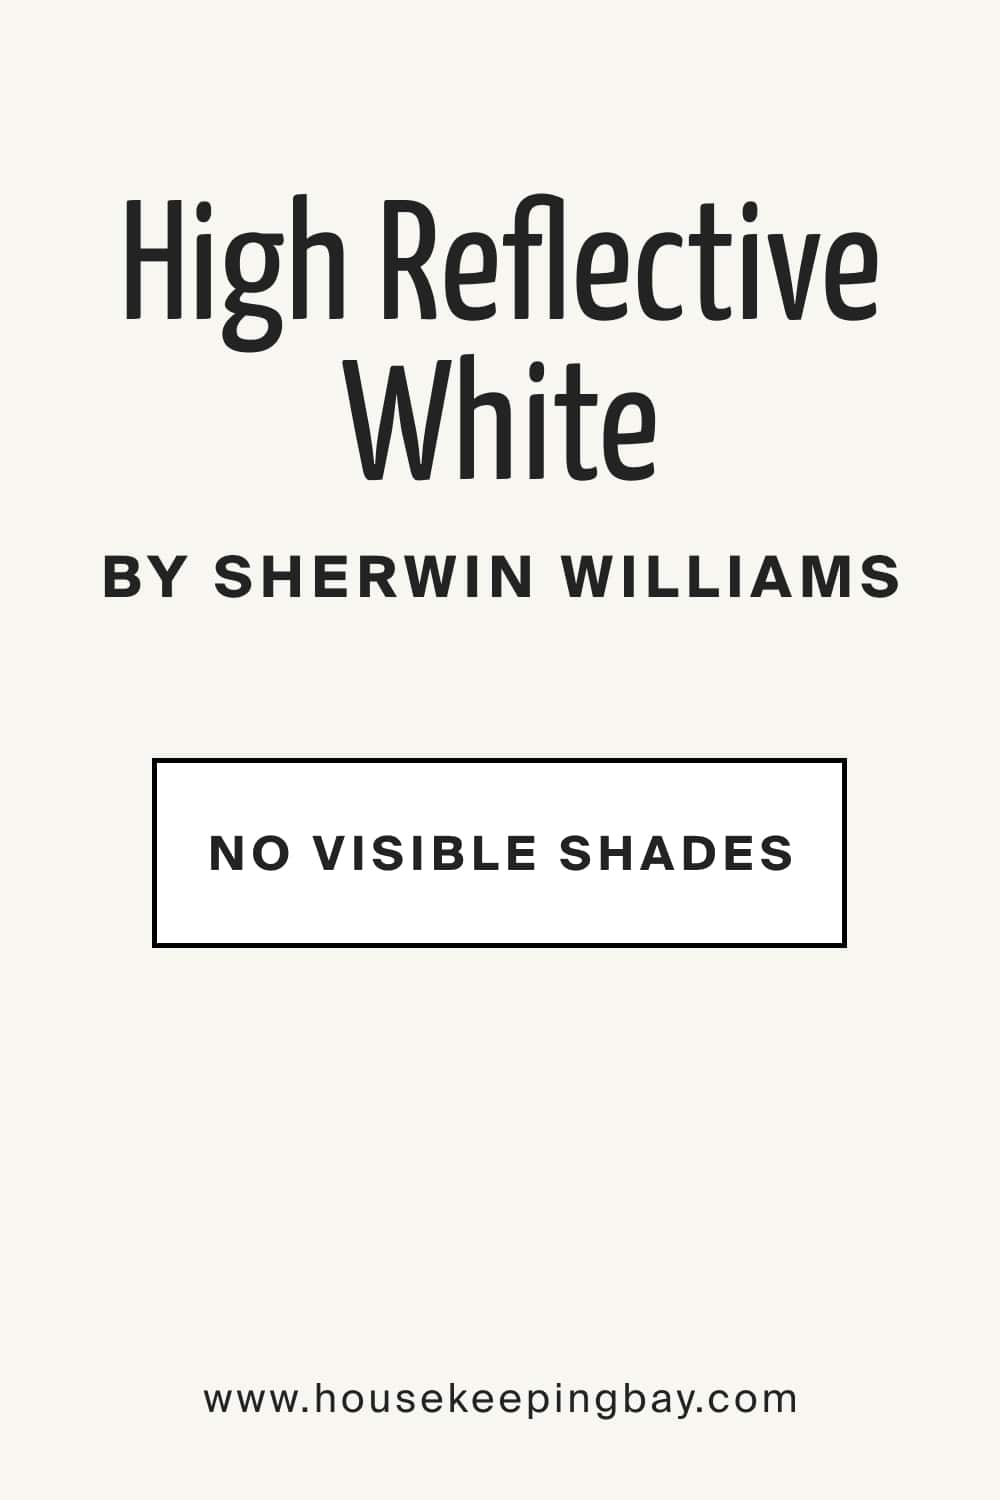 High Reflective White SW 7757 by Sherwin Williams Color Undertones